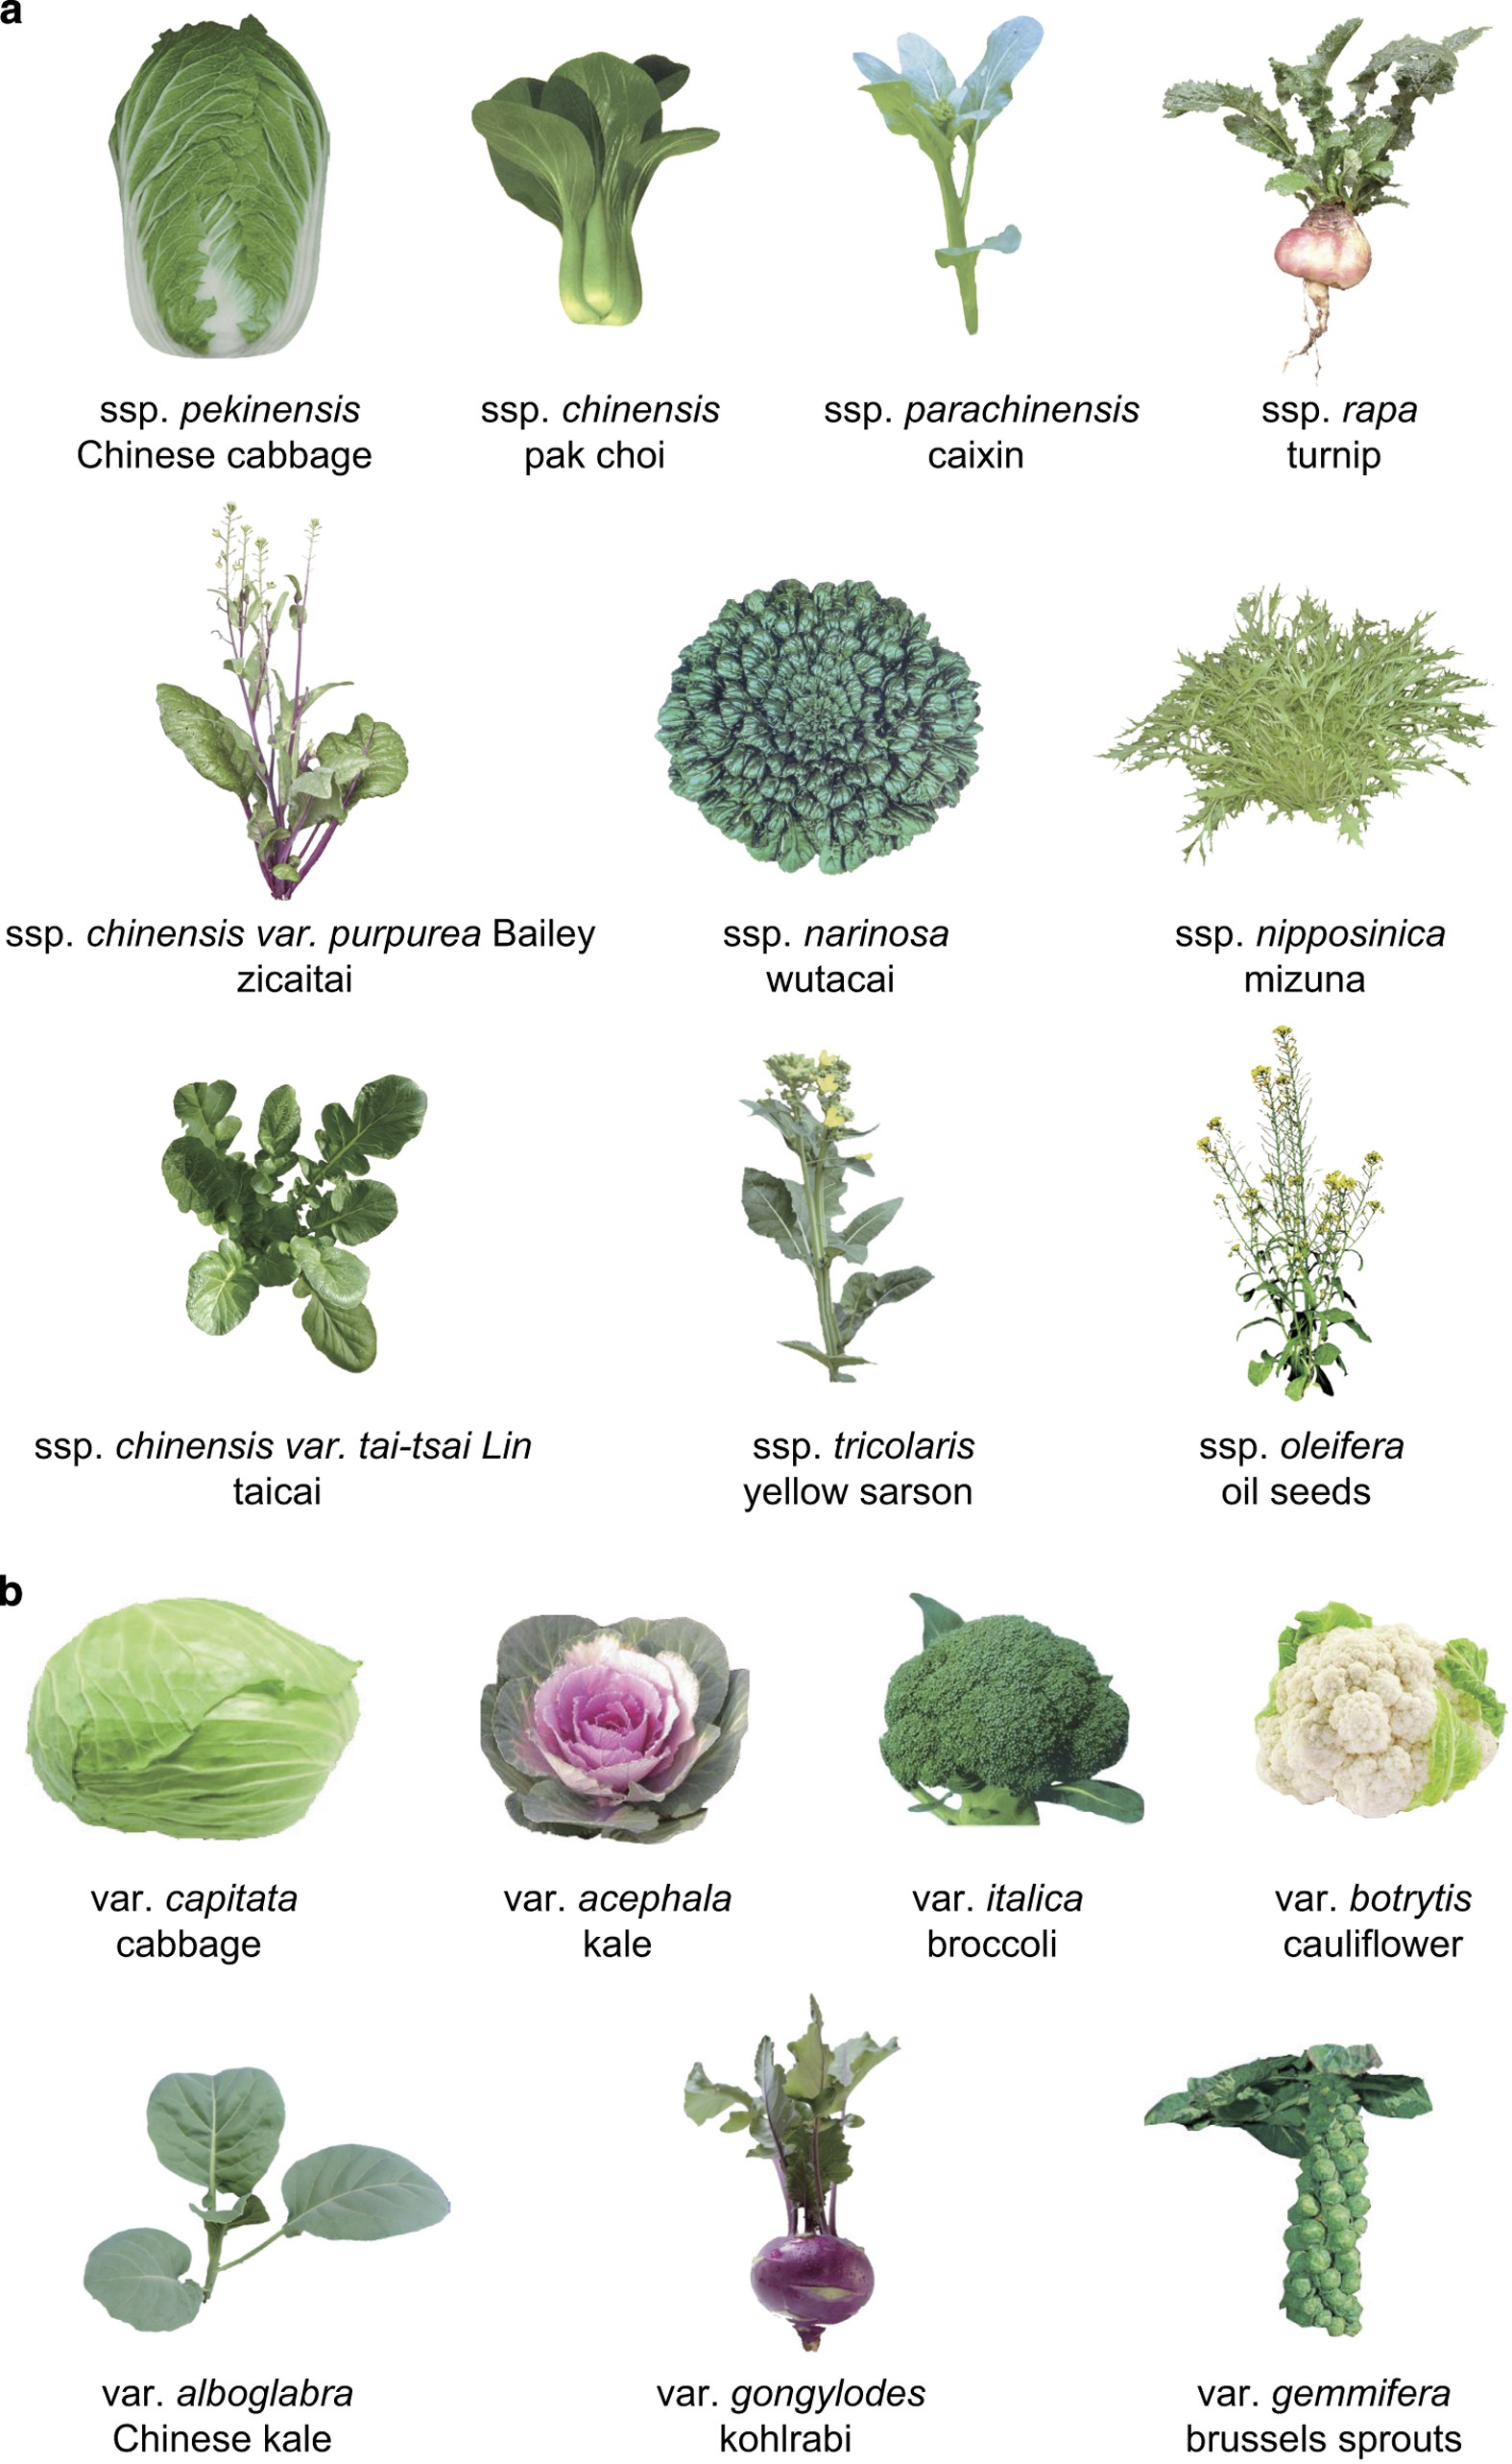 Genome resequencing and comparative variome analysis in a Brassica rapa and  Brassica oleracea collection | Scientific Data